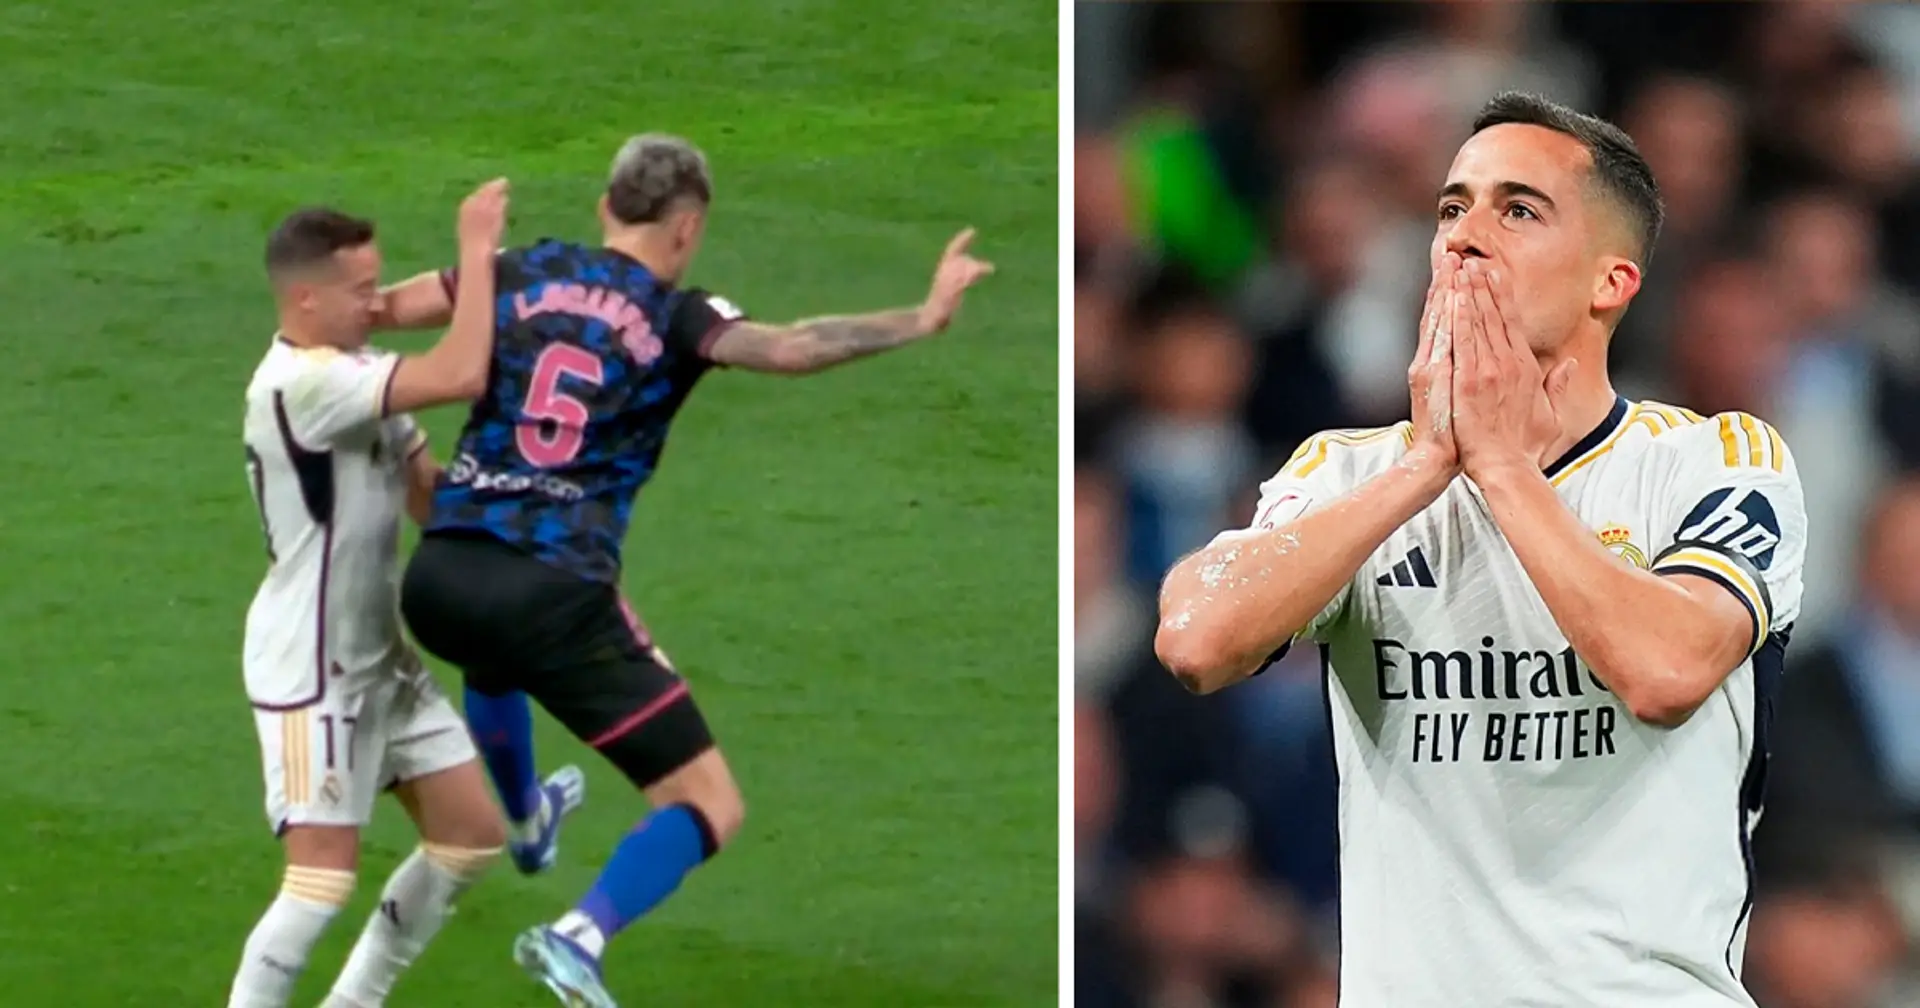 Caught on camera: How Lucas Vázquez face looks after the elbow by Lucas Ocampos that he wasn't even booked for